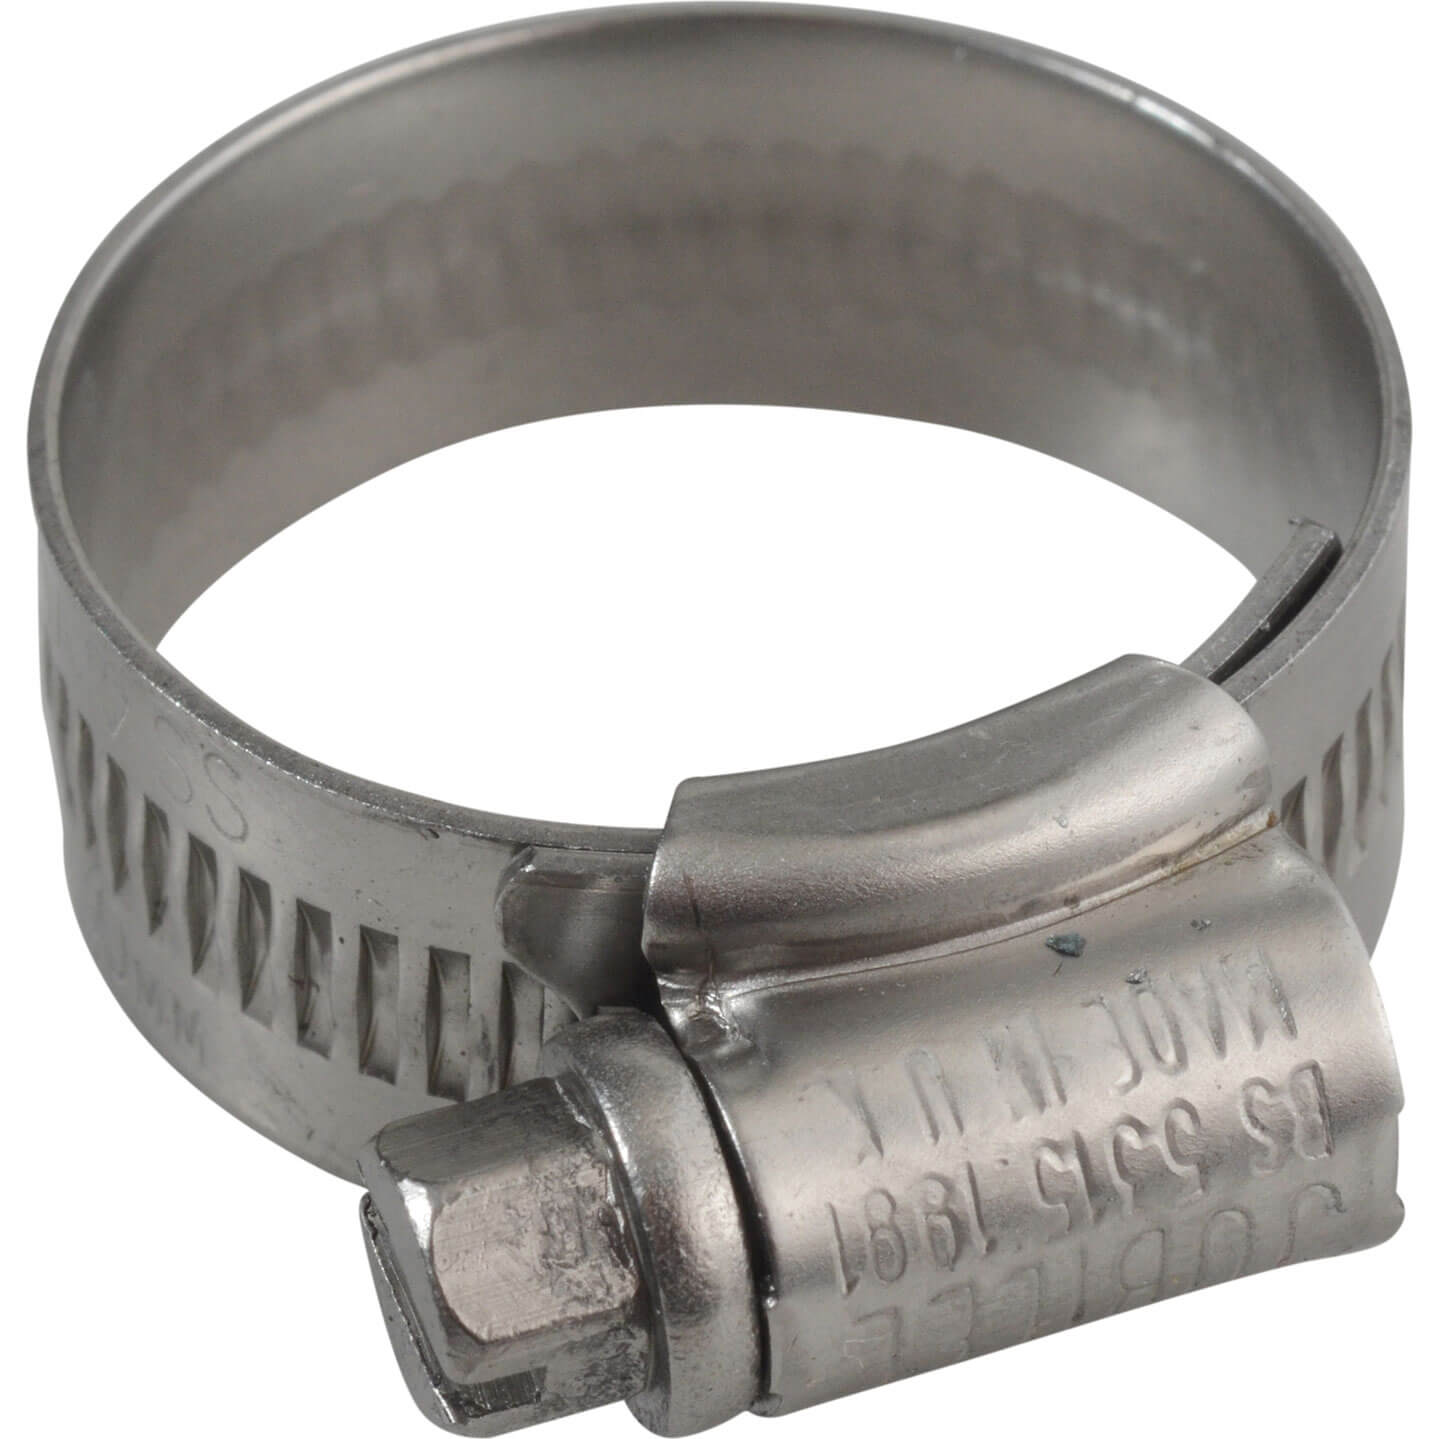 Jubilee OX Stainless Steel Hose Clip 18 to 25mm (3/4 to 1")